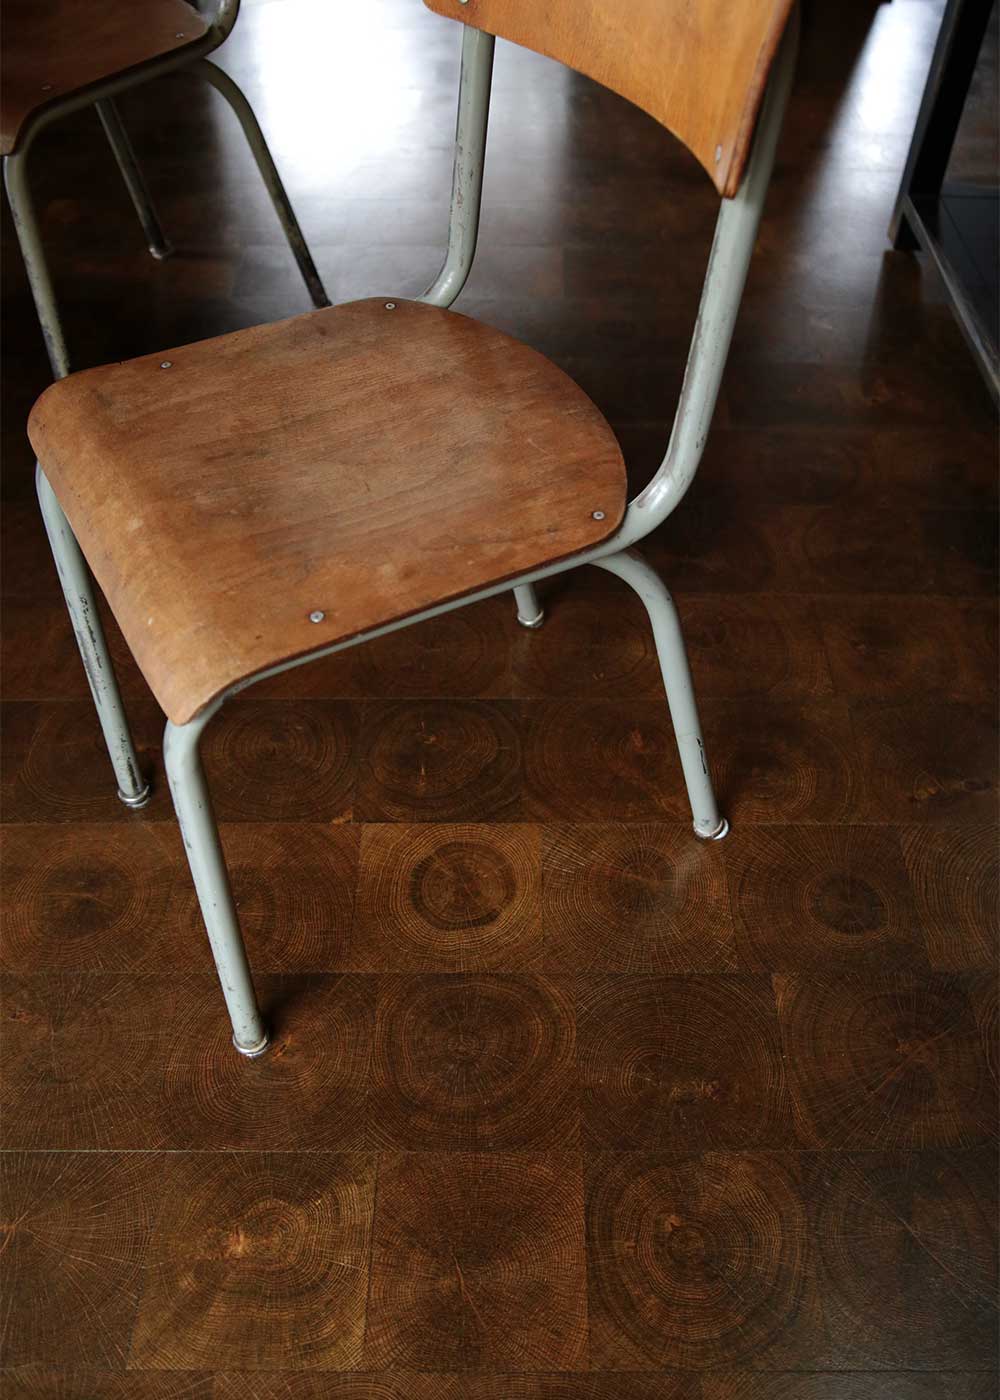 Kaswell End Grain flooring at the minne stuga cabin by Melissa Coleman